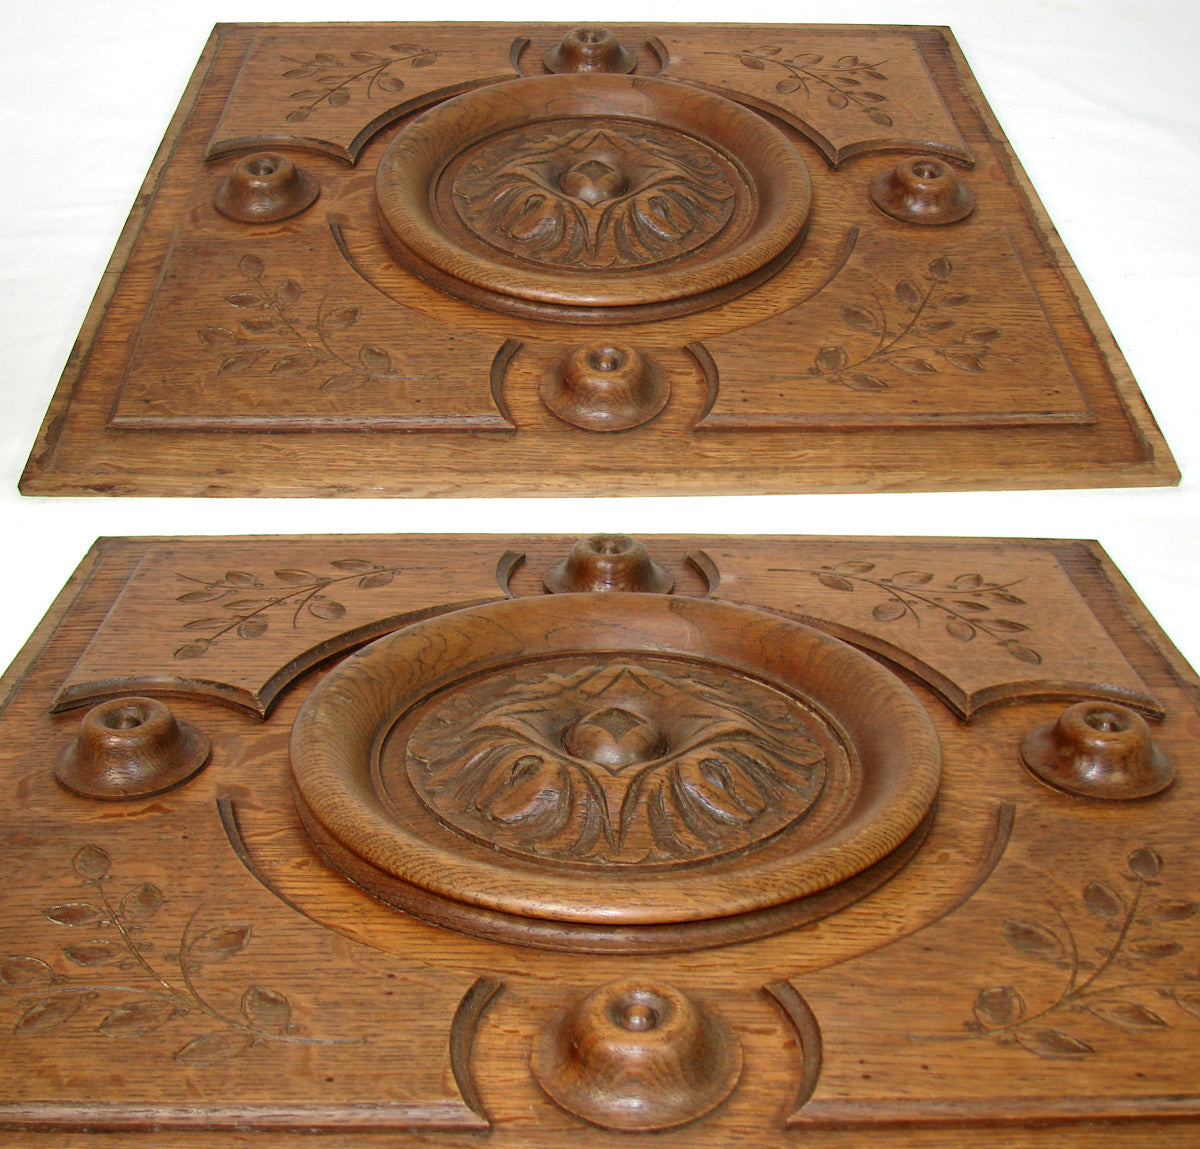 Antique Victorian Carved Oak Furniture or Cabinet Door Panel PAIR, Architectural Salvage